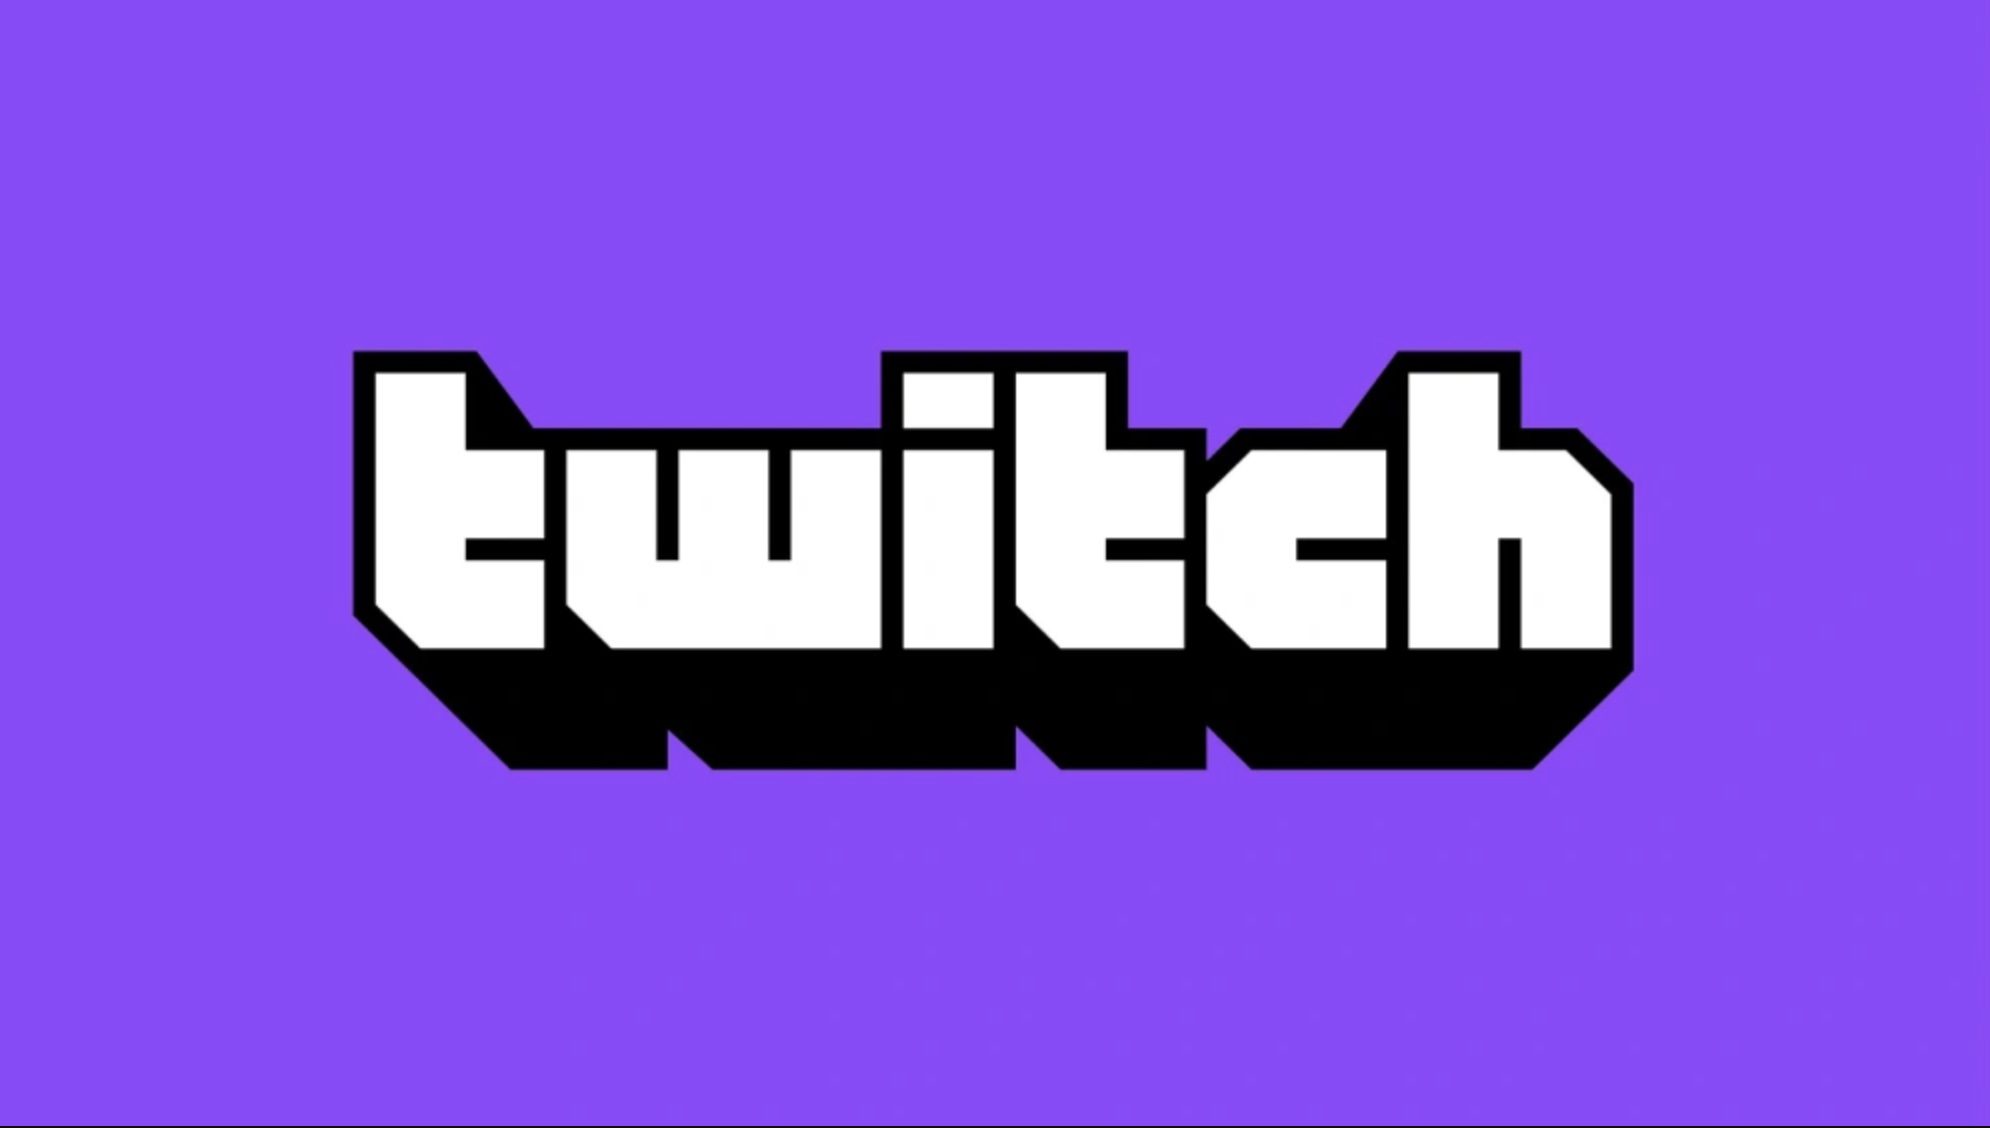 reportedly overhauling Twitch Prime to Prime Gaming